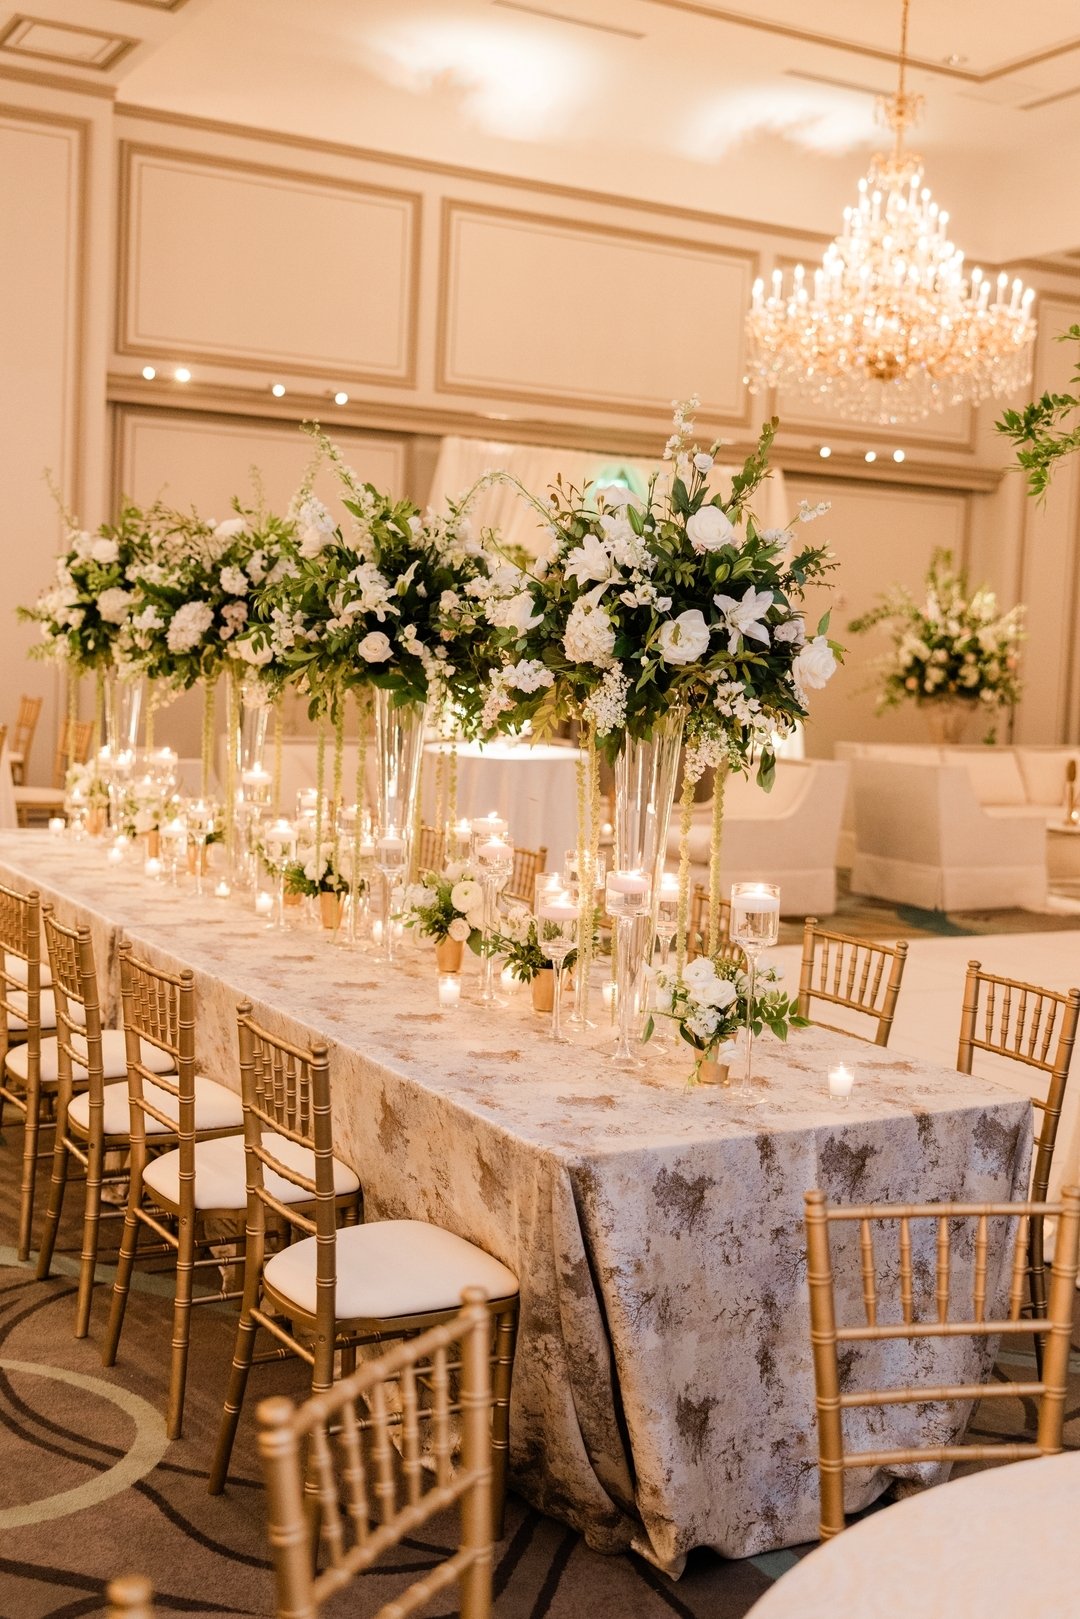 Family tables set with tall arrangements, sprinklings of bud vases, and floating monet candles 🕯️